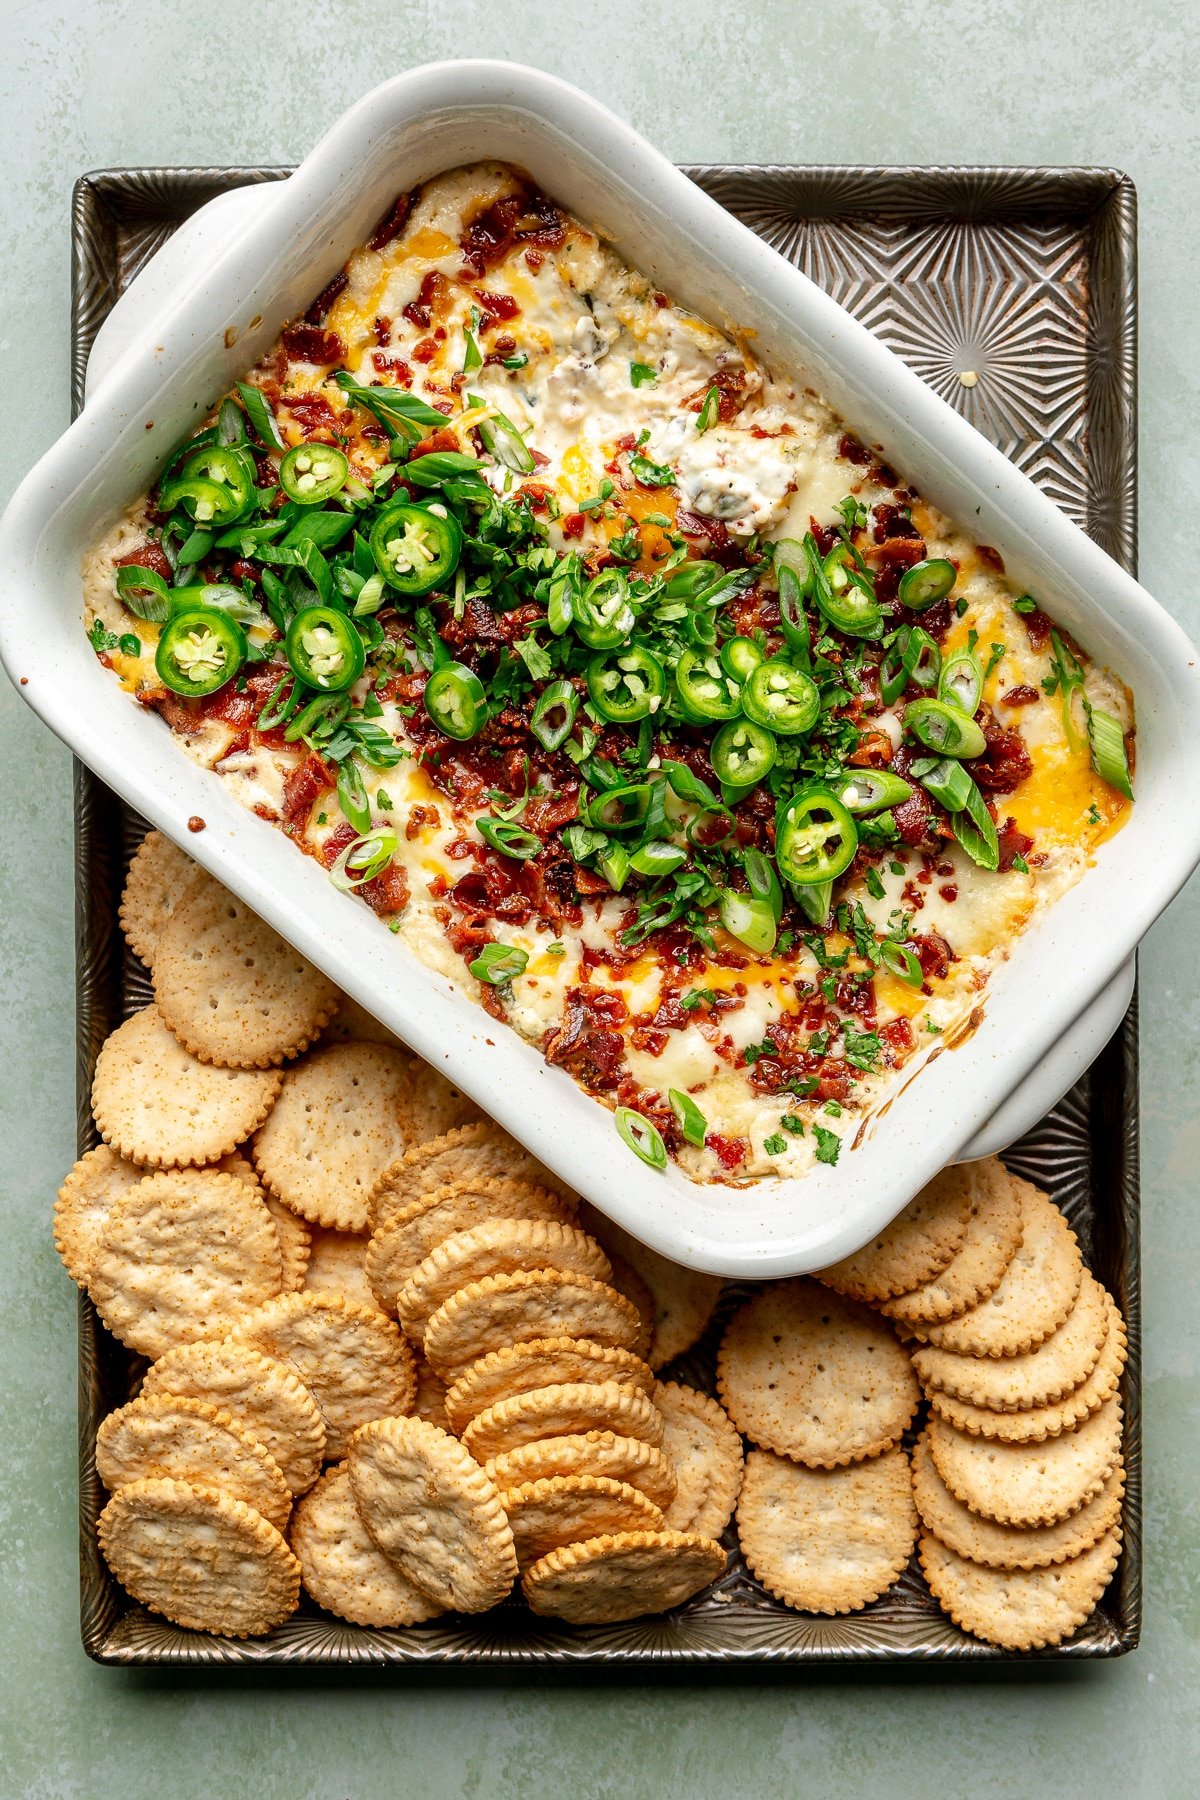 Jalapeno popper dip, which still sits in its casserole dish, has been topped with diced jalapeños. It sits on a tray alongside round crackers.